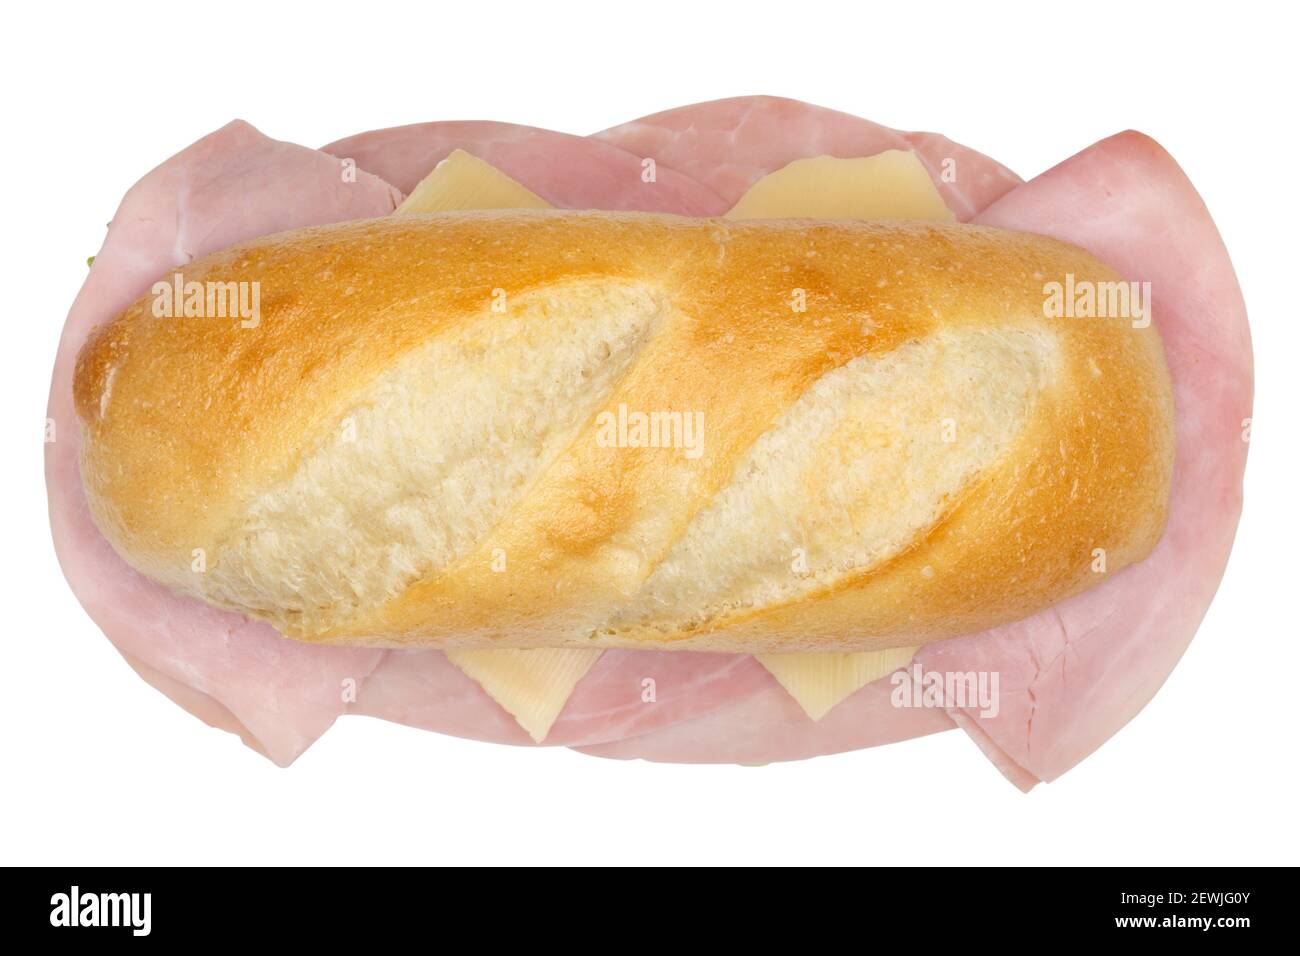 Sub sandwich with ham and cheese from above isolated on a white background. Stock Photo